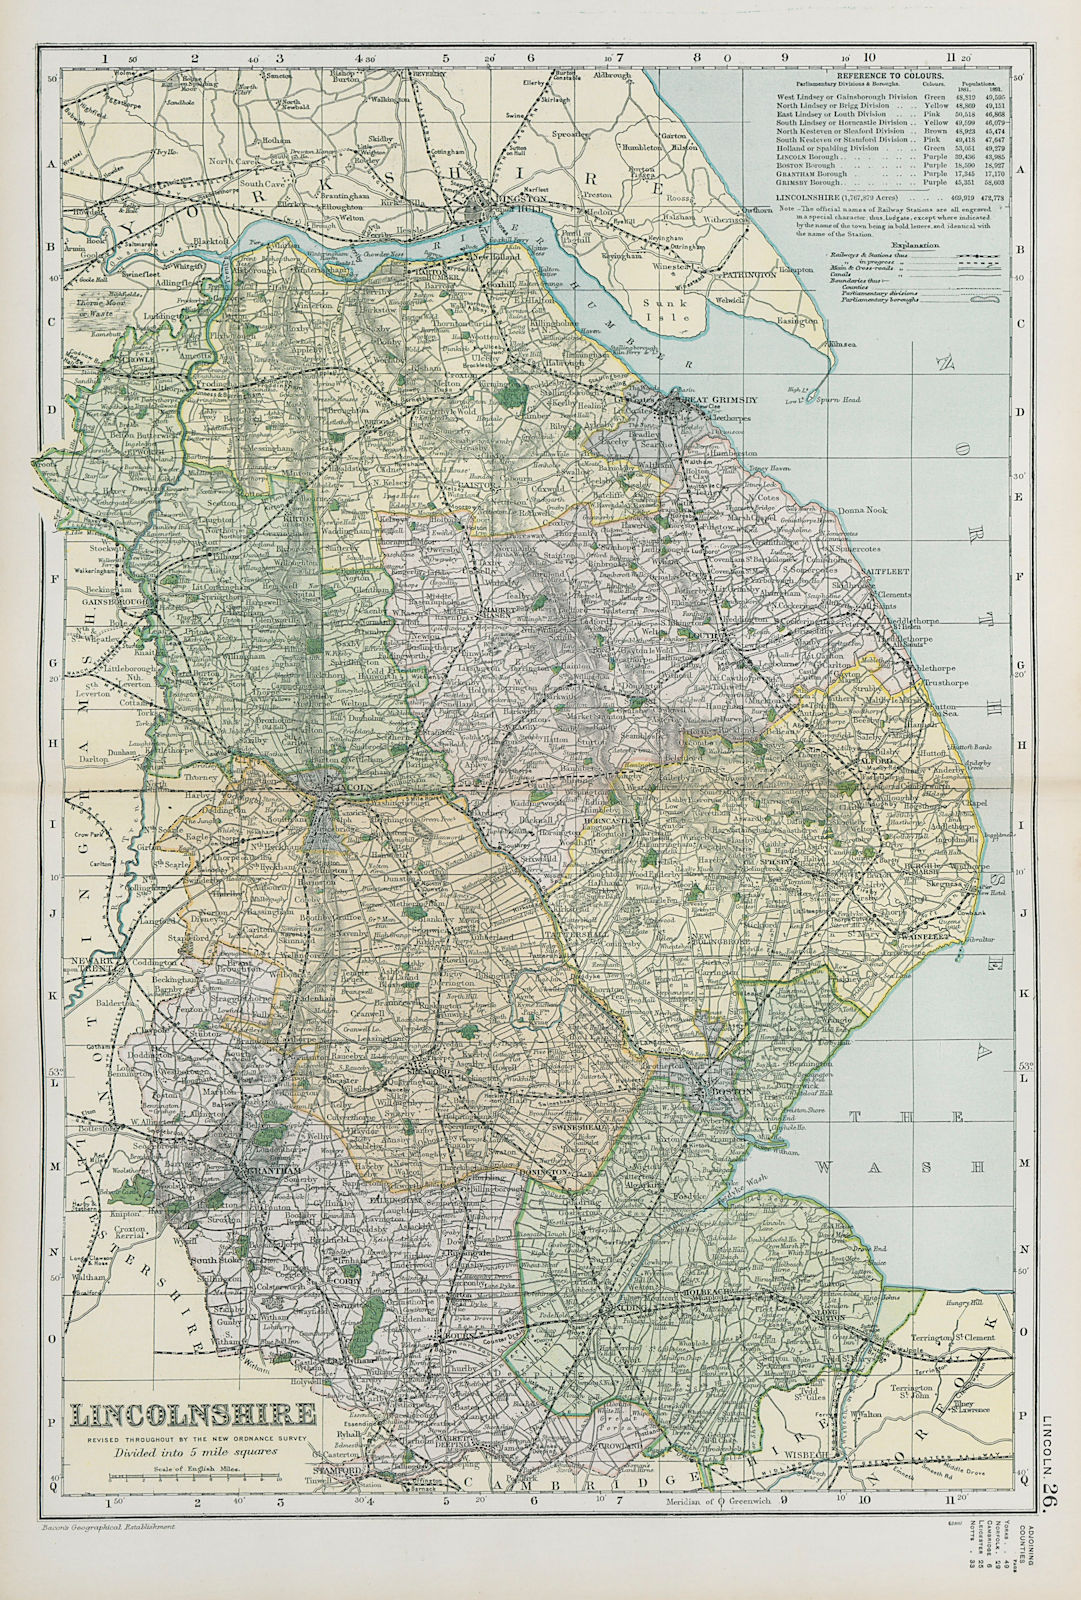 LINCOLNSHIRE. Showing Parliamentary divisions, boroughs & parks. BACON 1900 map